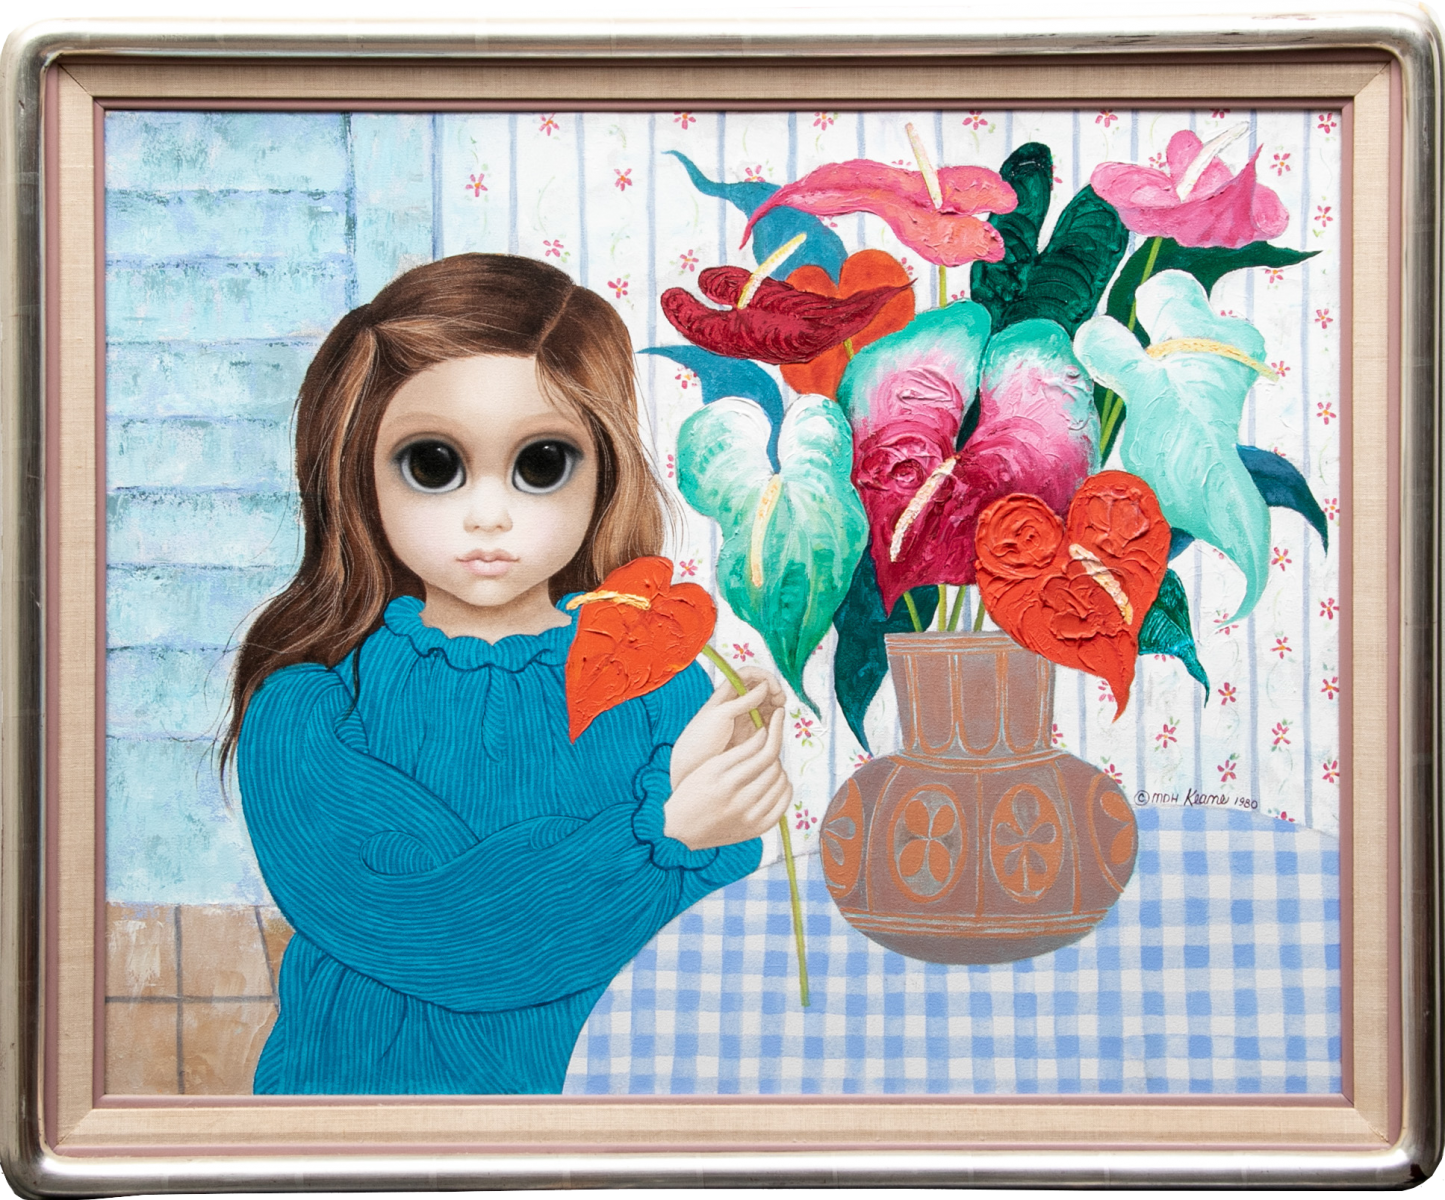 MARGARET KEANE (AMERICAN, B.1927), PORTRAIT OF A GIRL WITH A VASE OF FLOWERS item 95930